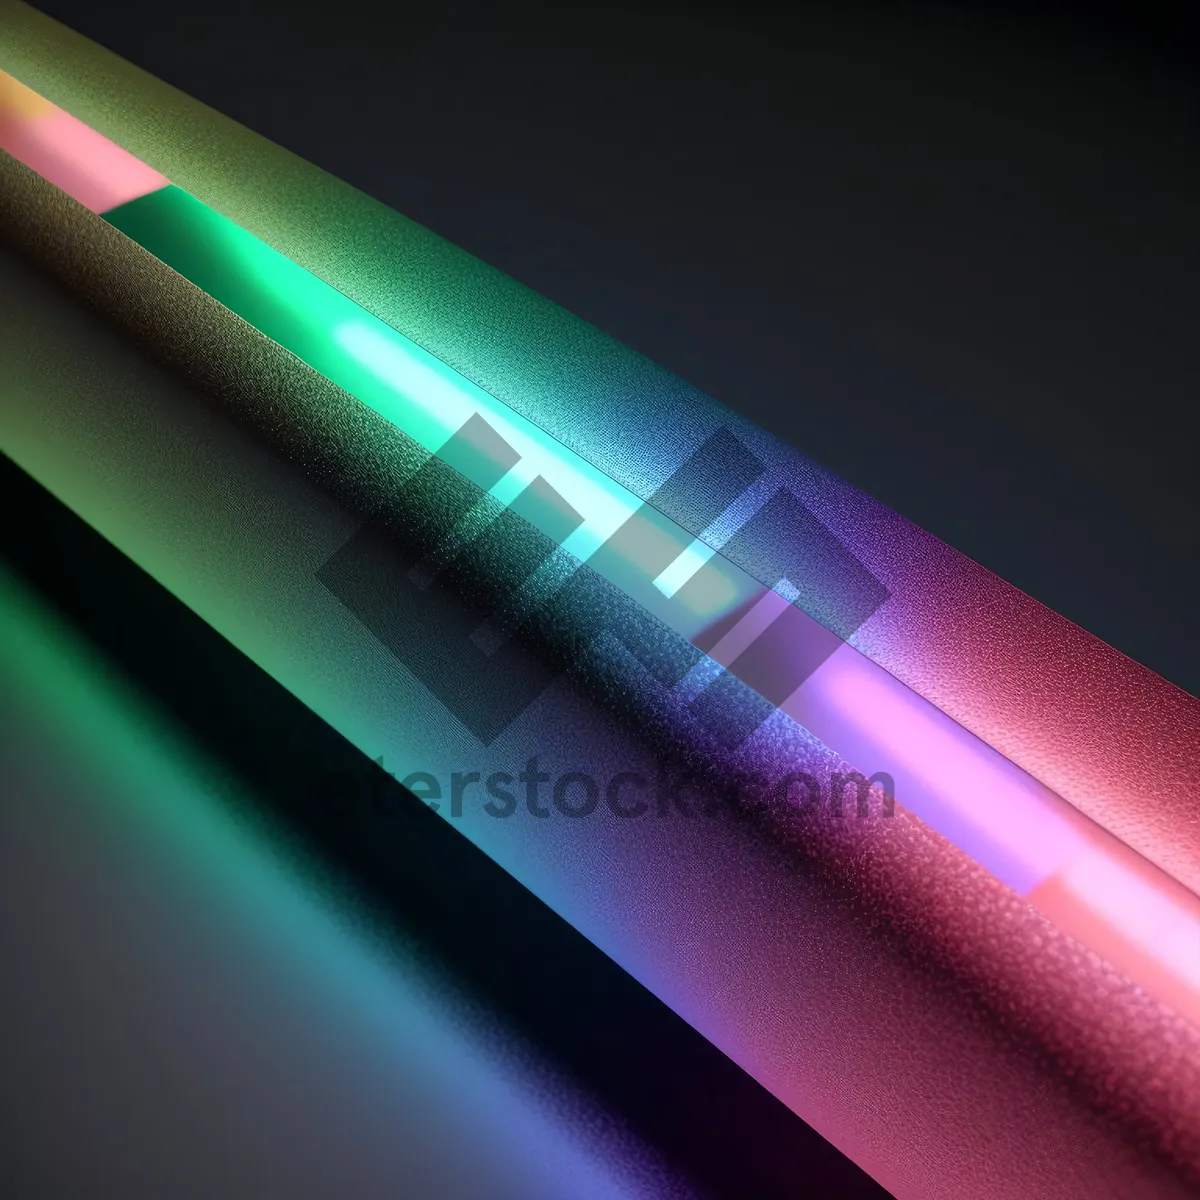 Picture of Energetic Futuristic Light Pattern with Vibrant Colors